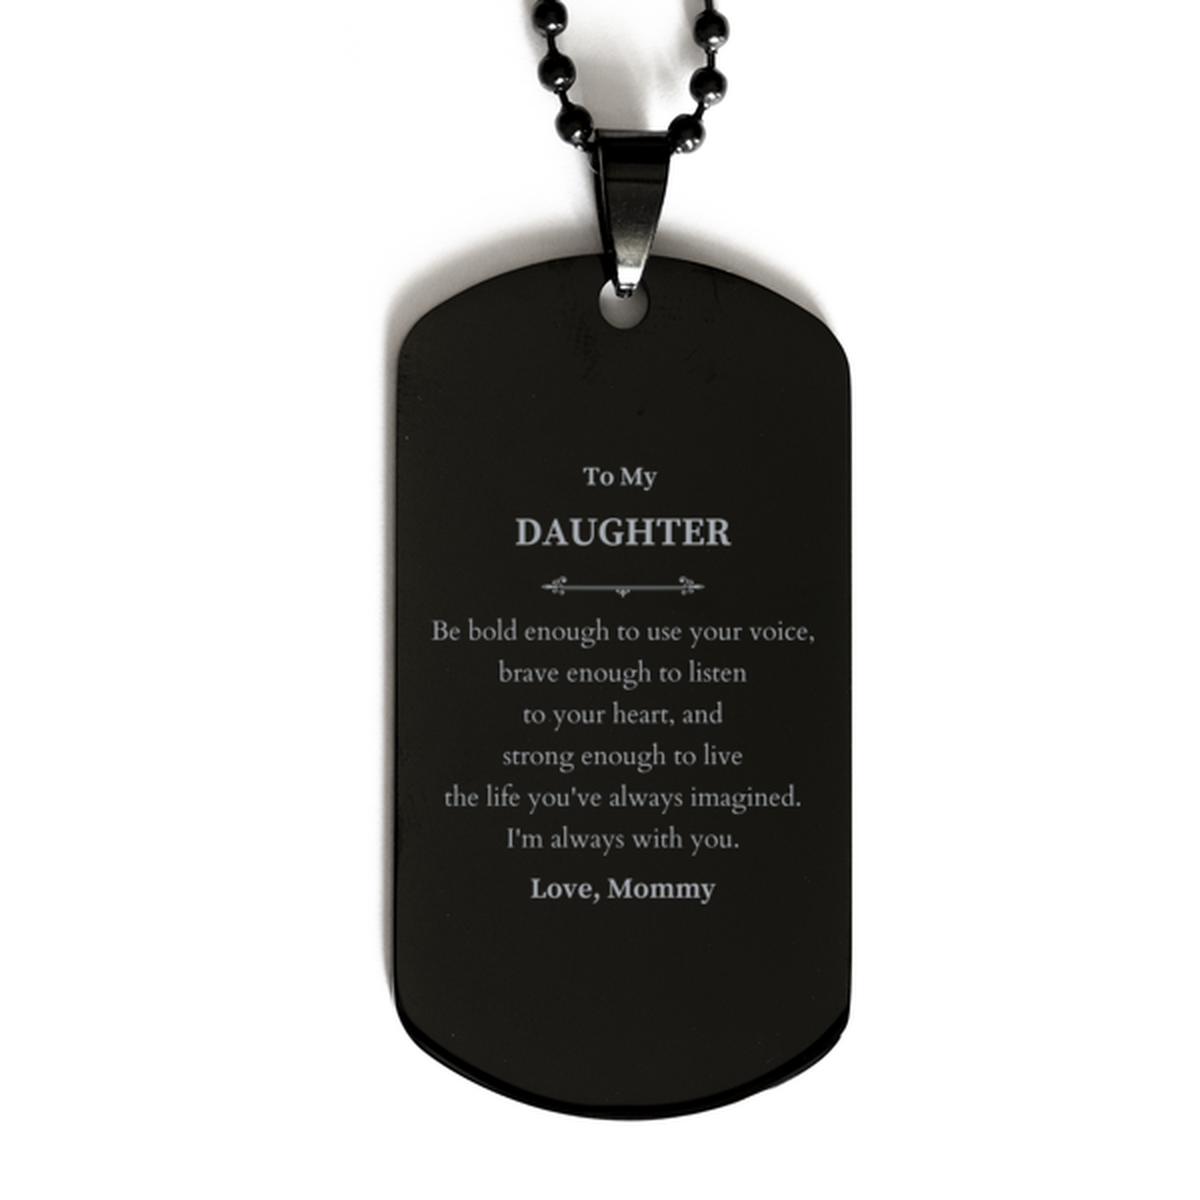 Keepsake Daughter Black Dog Tag Gift Idea Graduation Christmas Birthday Daughter from Mommy, Daughter Be bold enough to use your voice, brave enough to listen to your heart. Love, Mommy